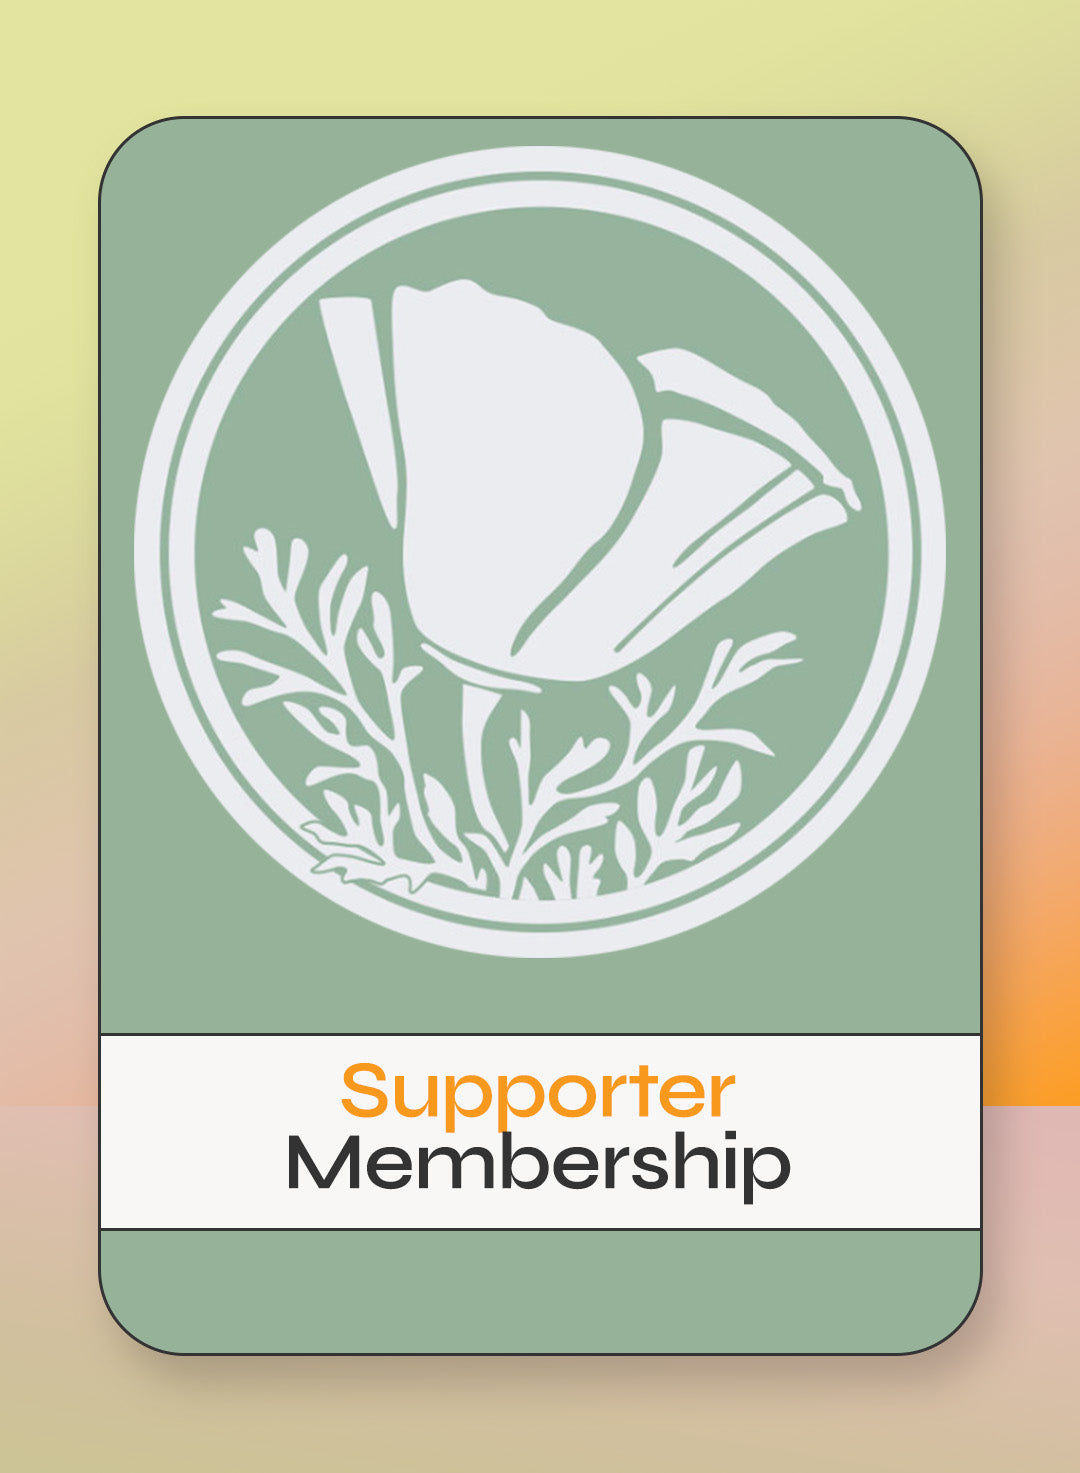 Annual Membership - Supporter